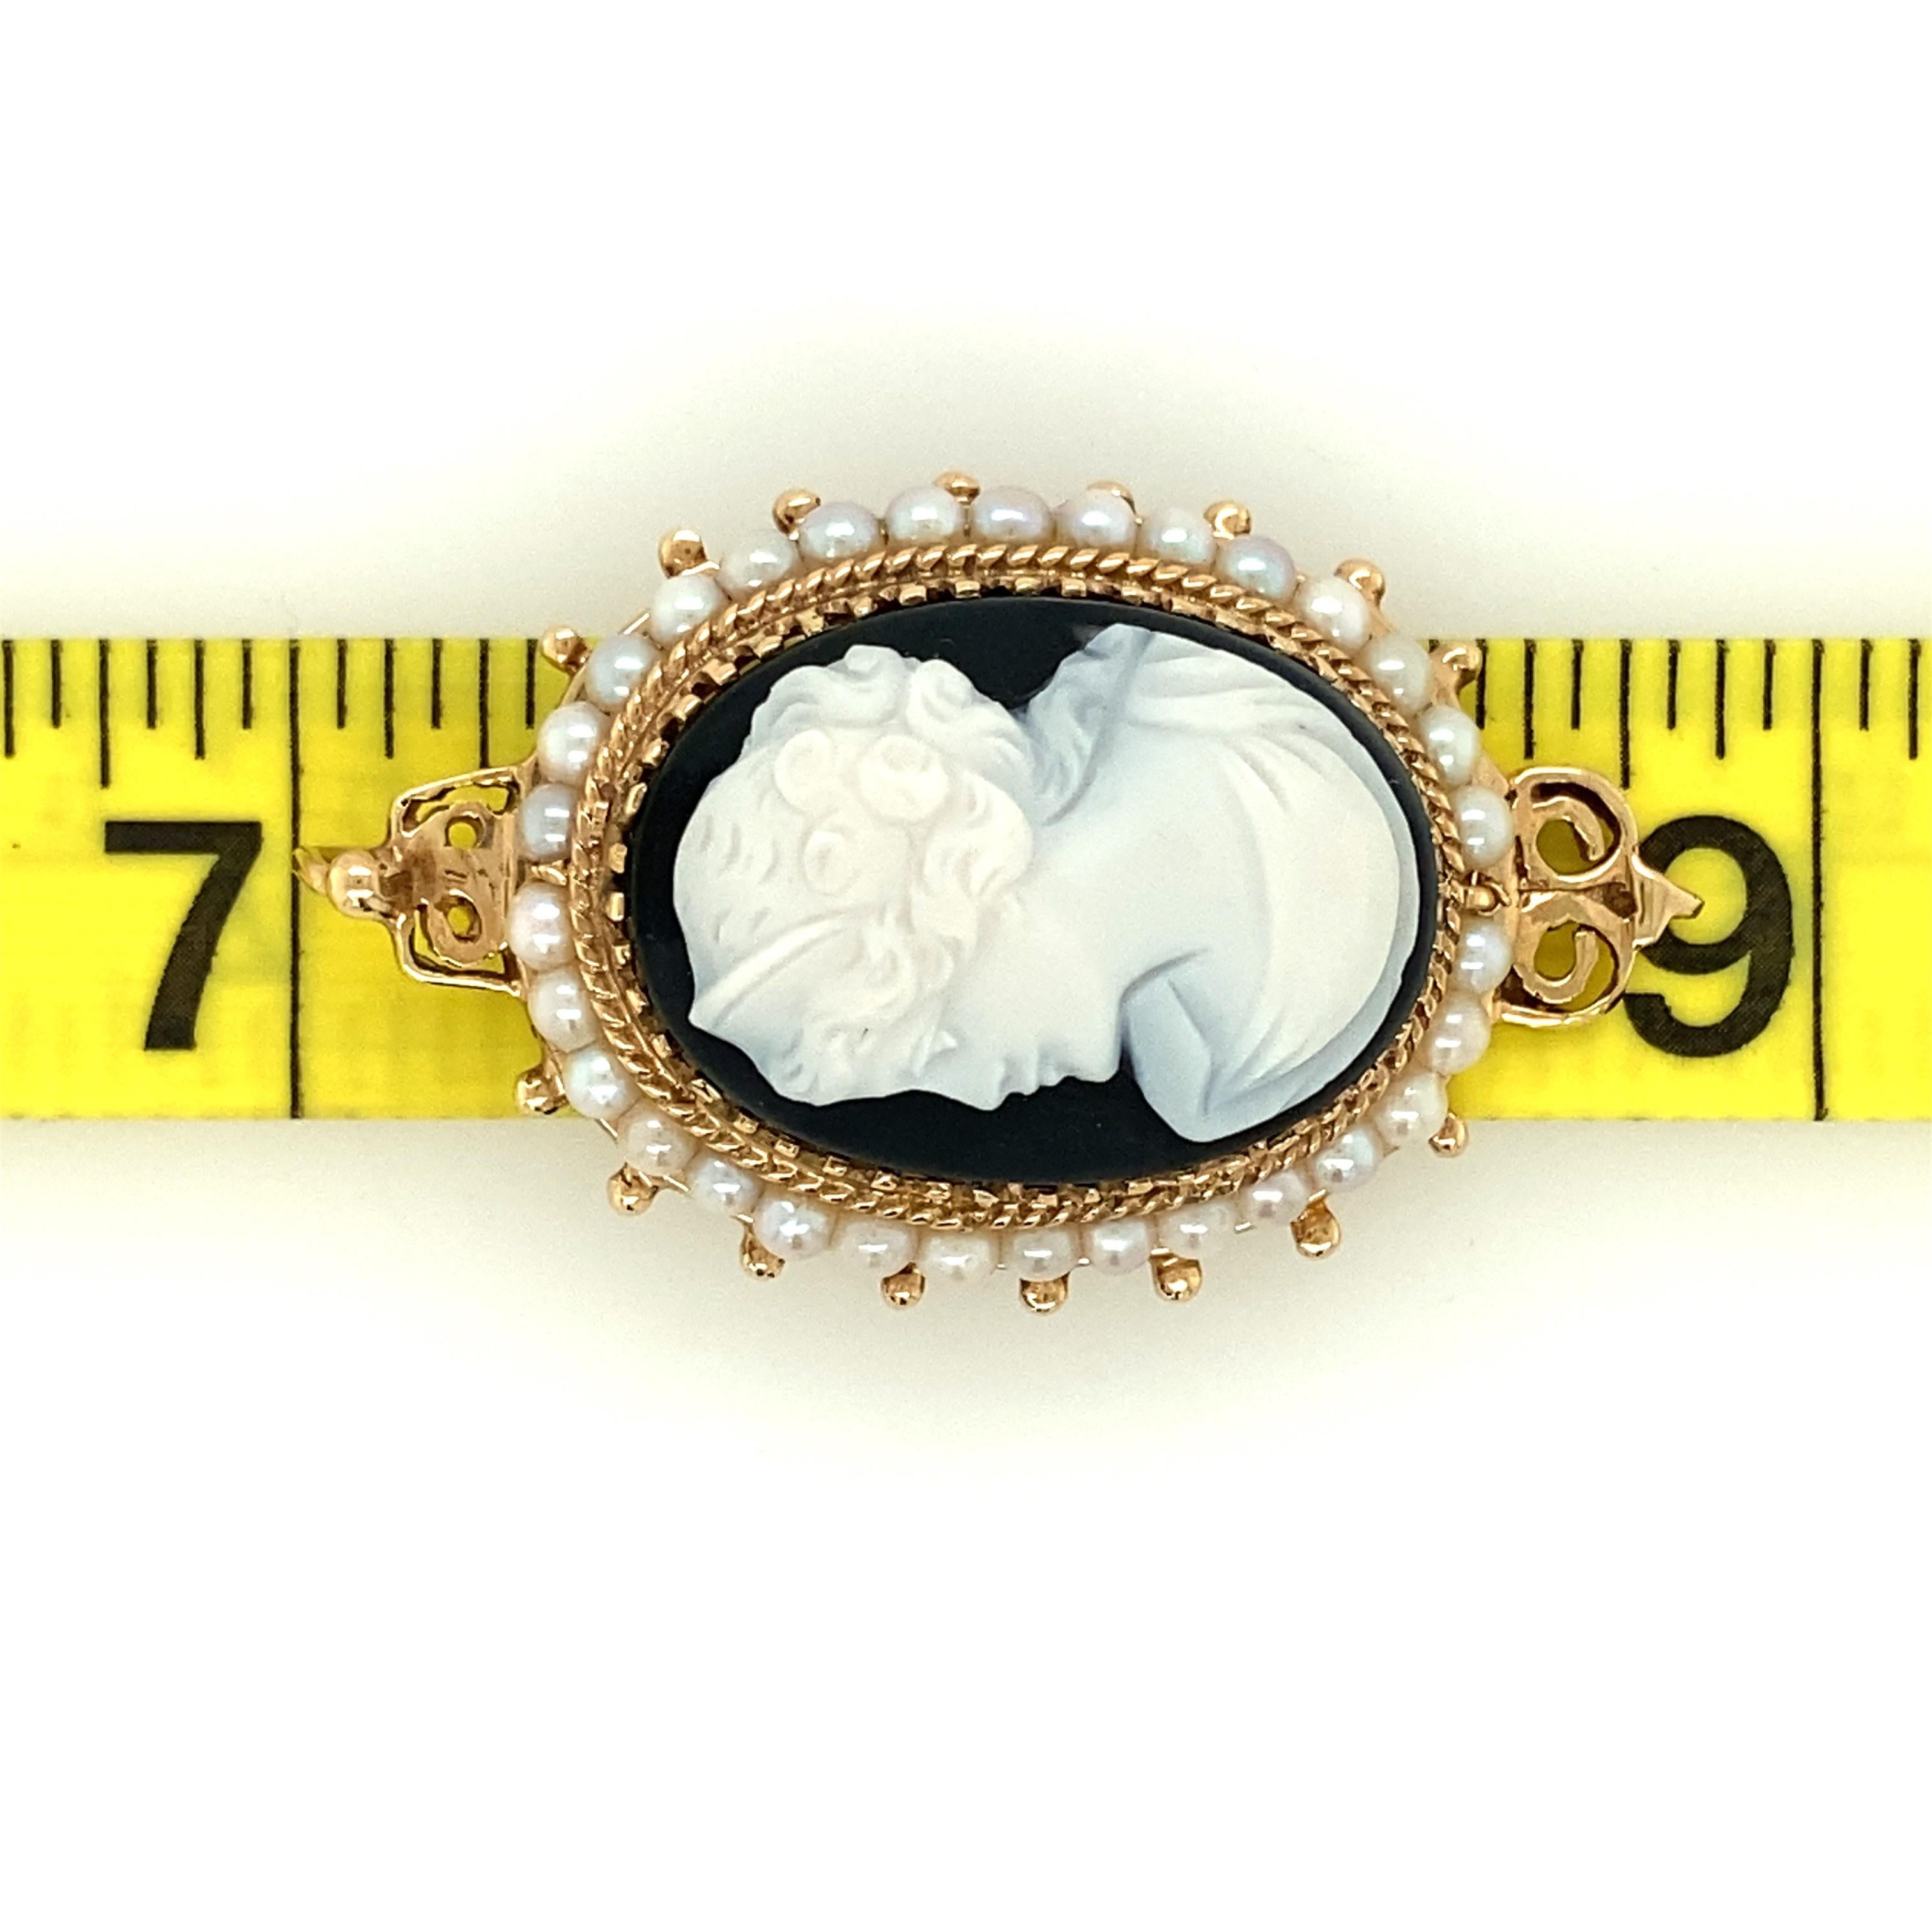 14K Yellow Gold Victorian Revival Hardstone and Pearl Cameo Brooch/Pendant 1960s 3